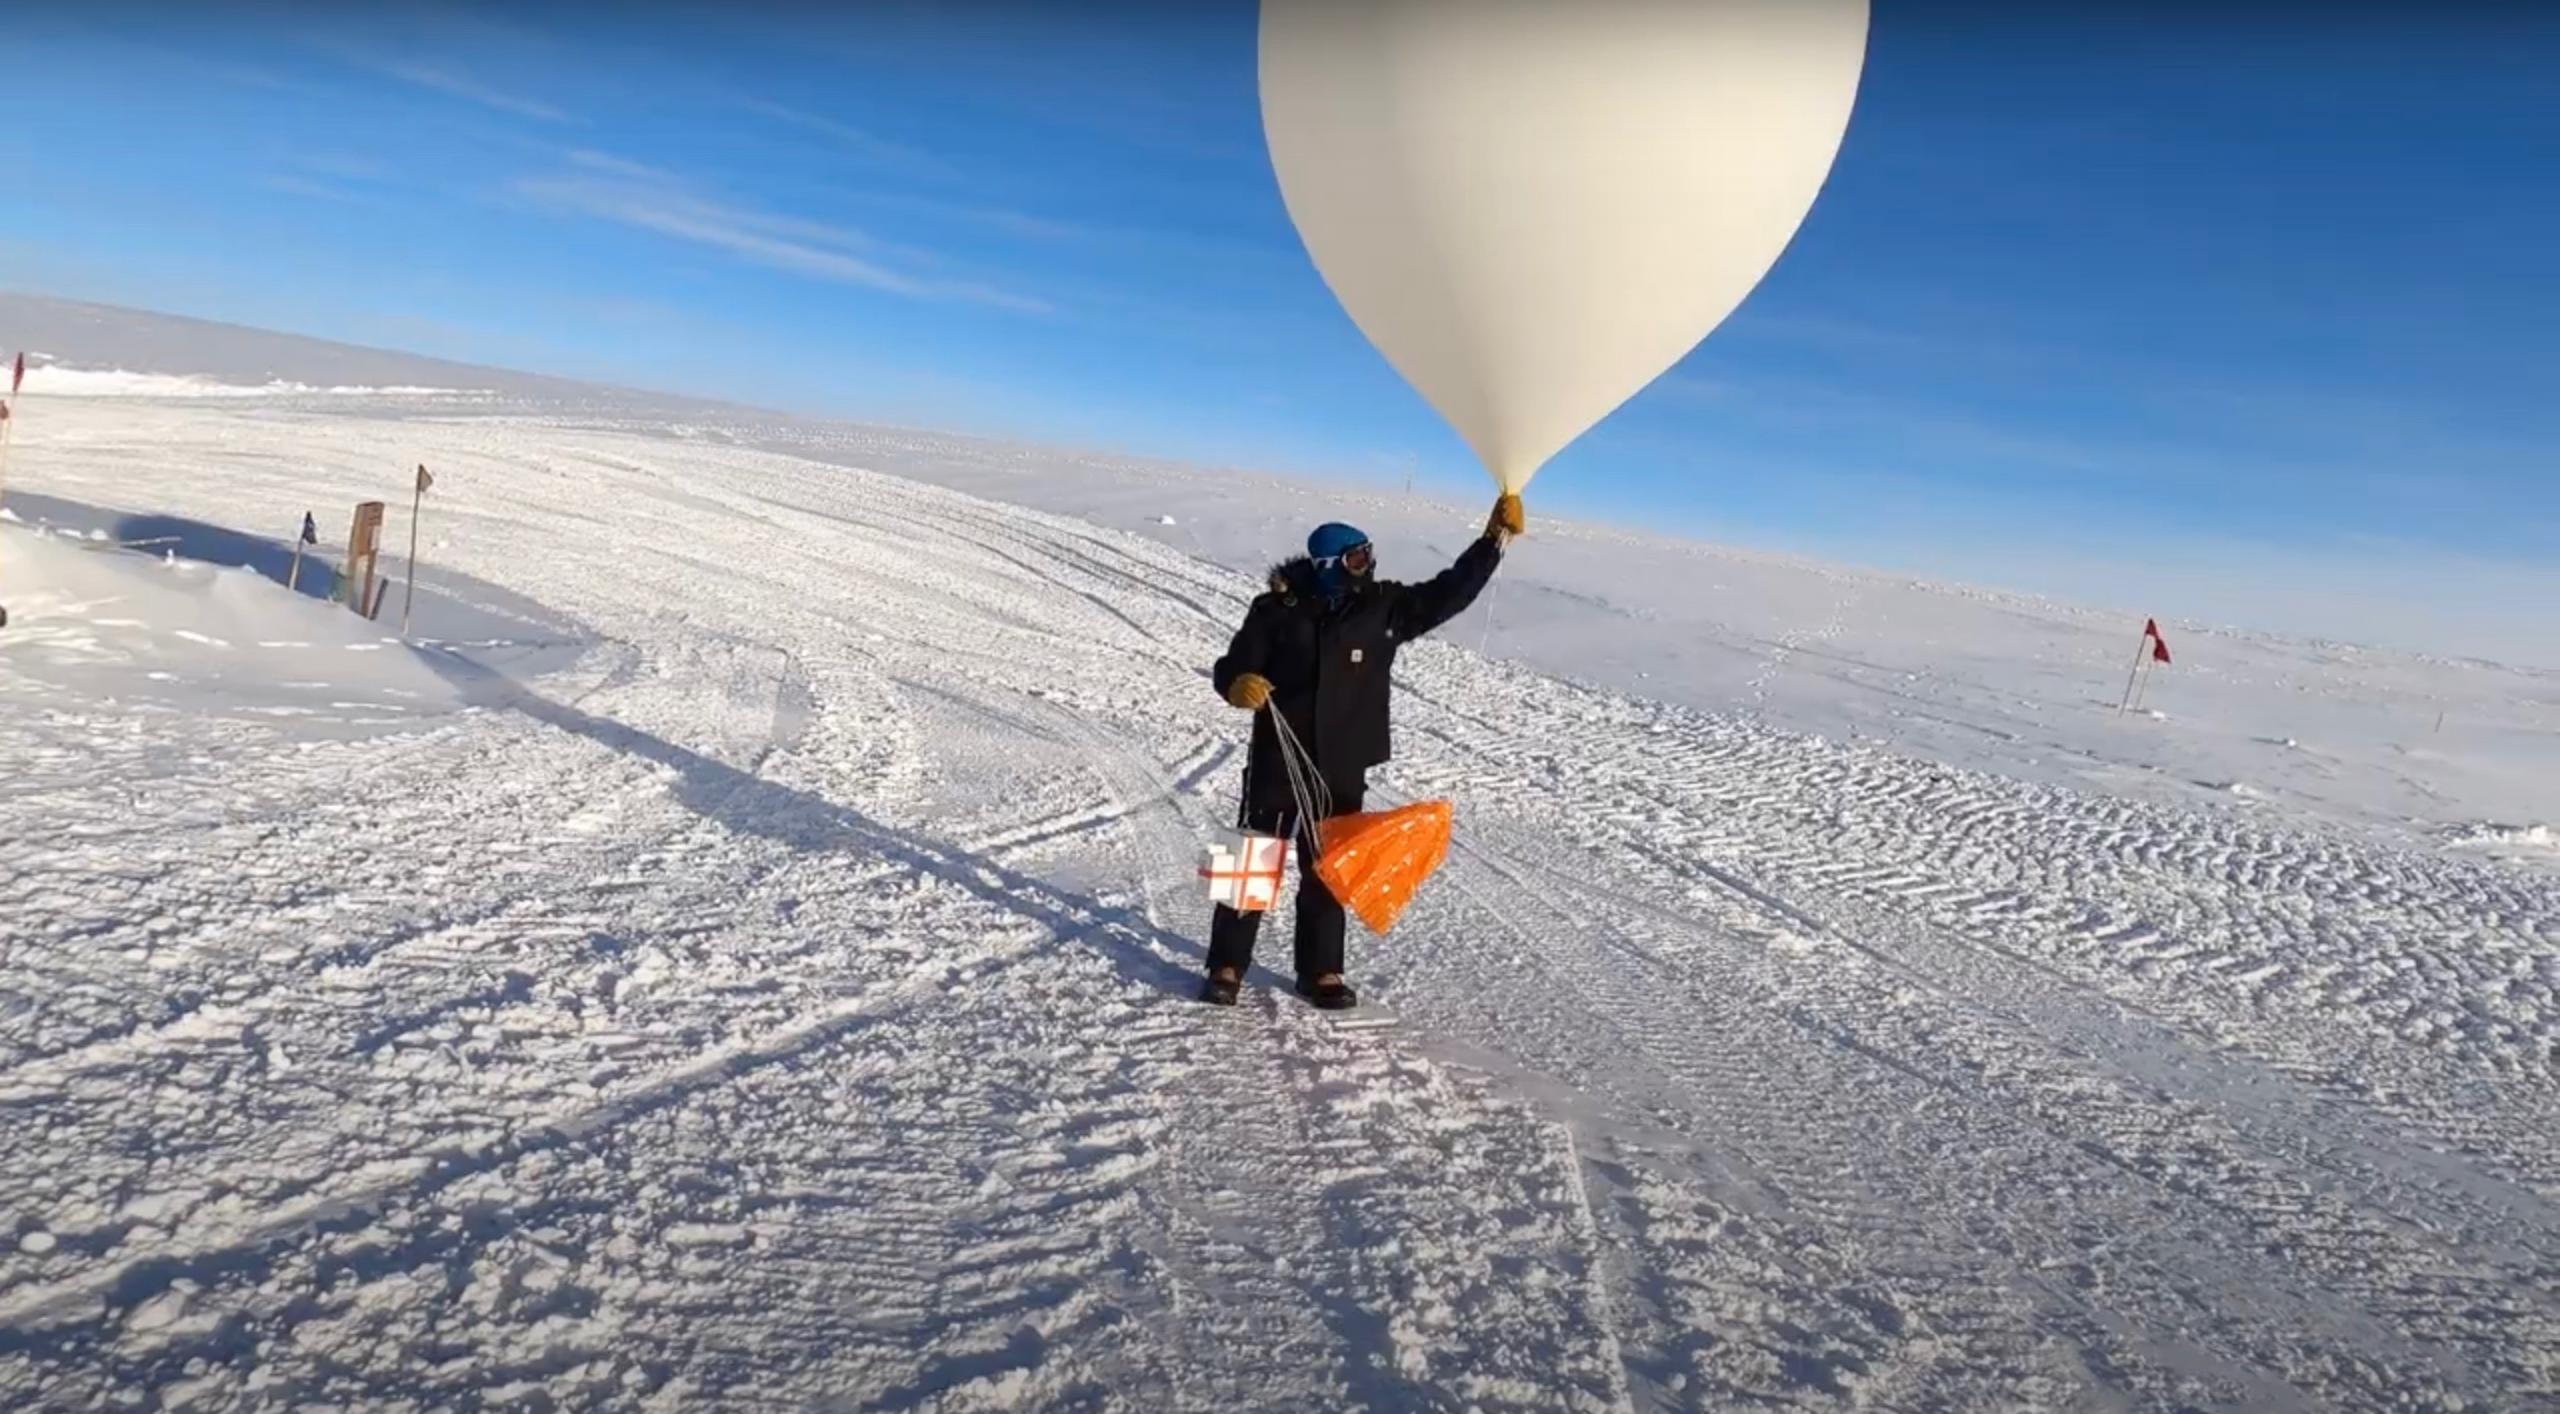 A scientist launched a weather balloon carrying an ozone probe from the Antarctic Station in March 2021. Credit: NOAA Global Monitoring Laboratory